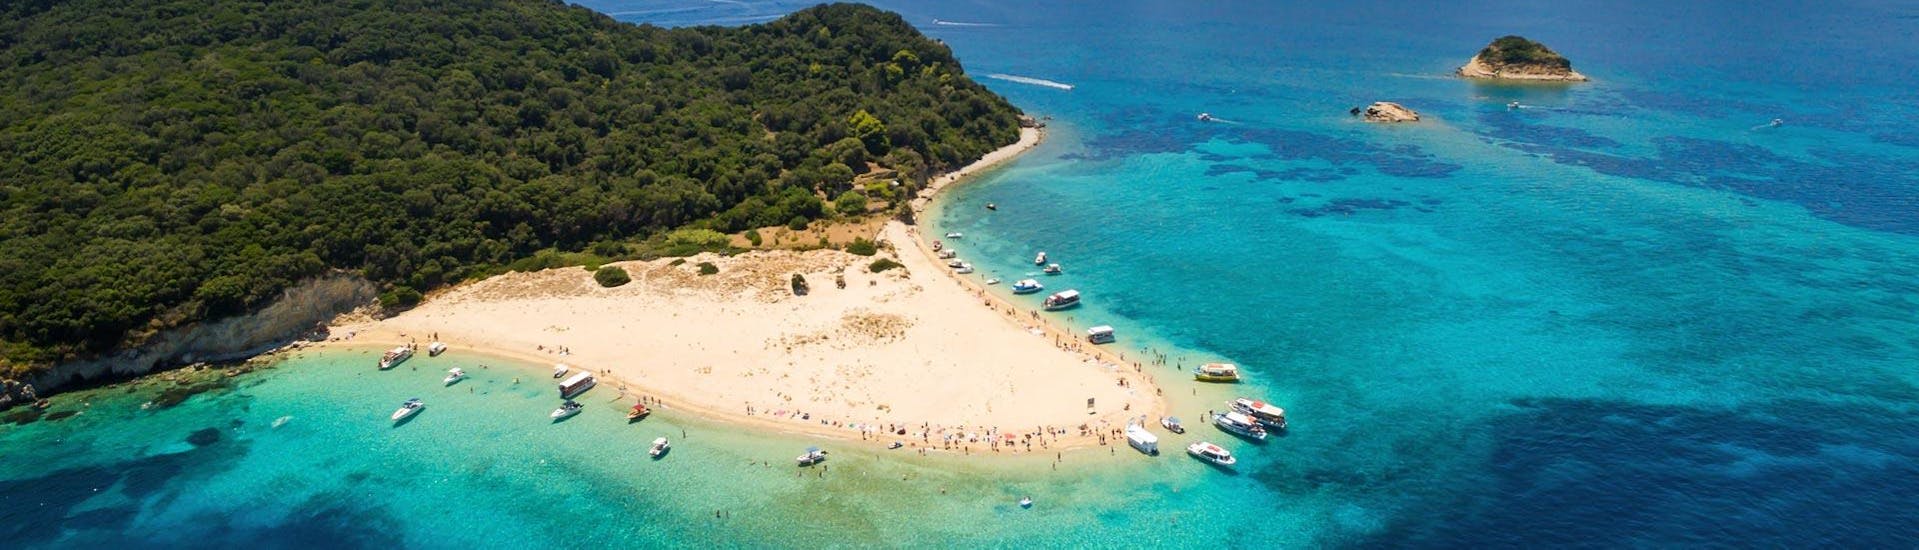 Turtle Island which you can visit during the boat rental in Zakynthos with Fun@Sea.